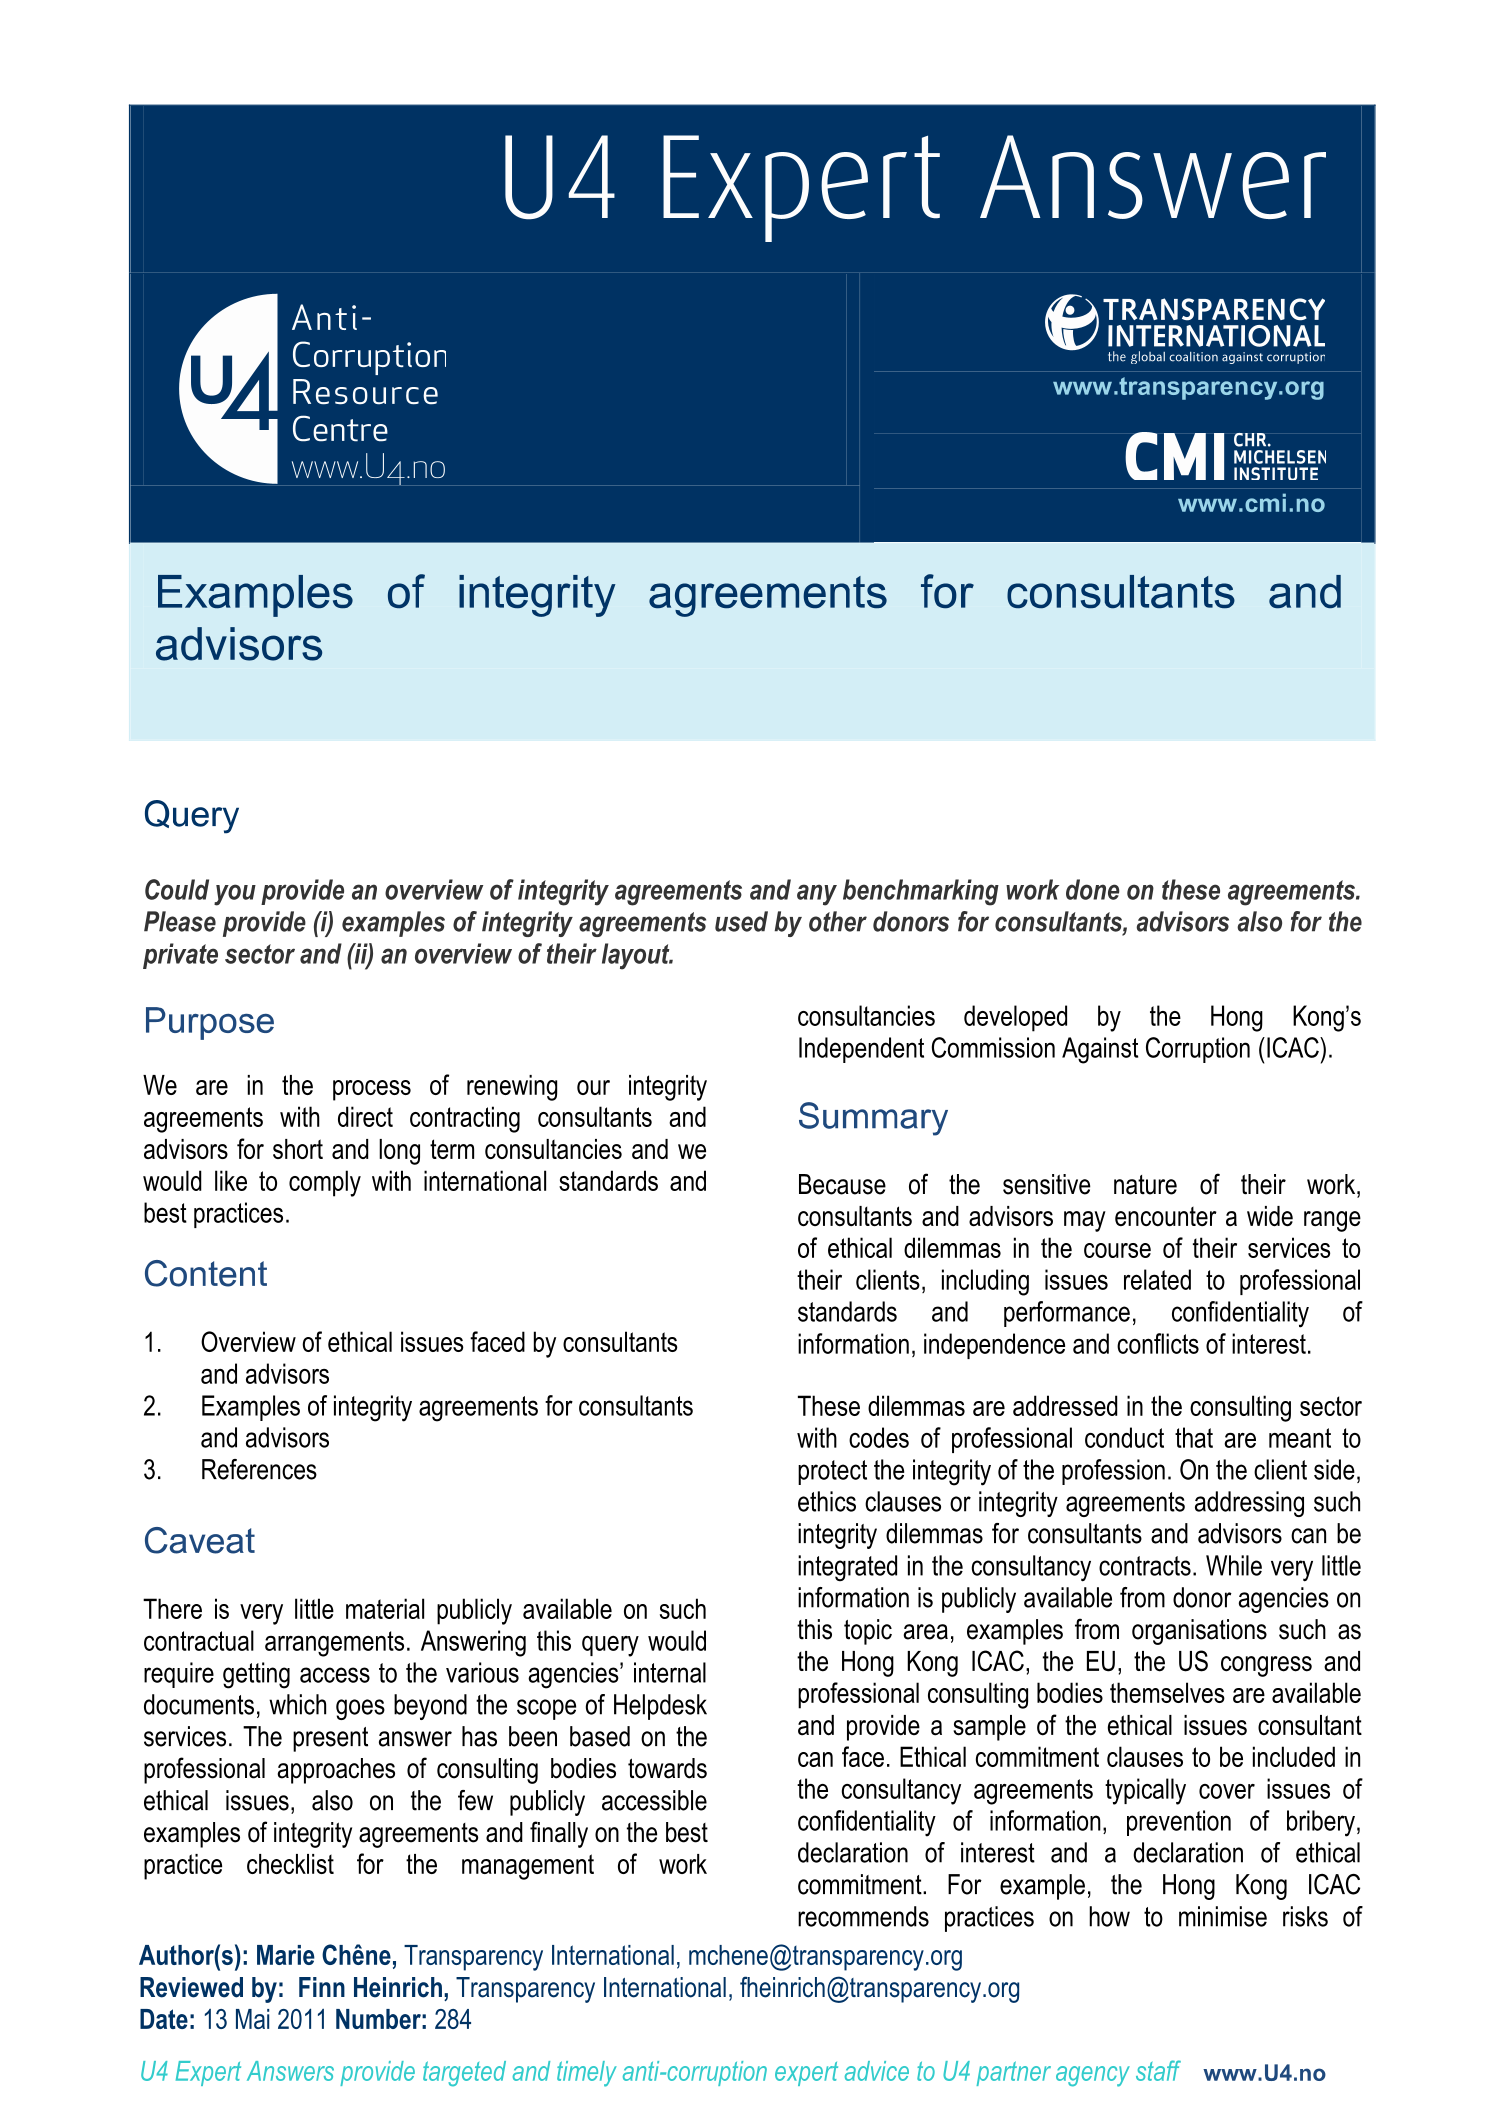 Examples of integrity agreements for consultants and advisors